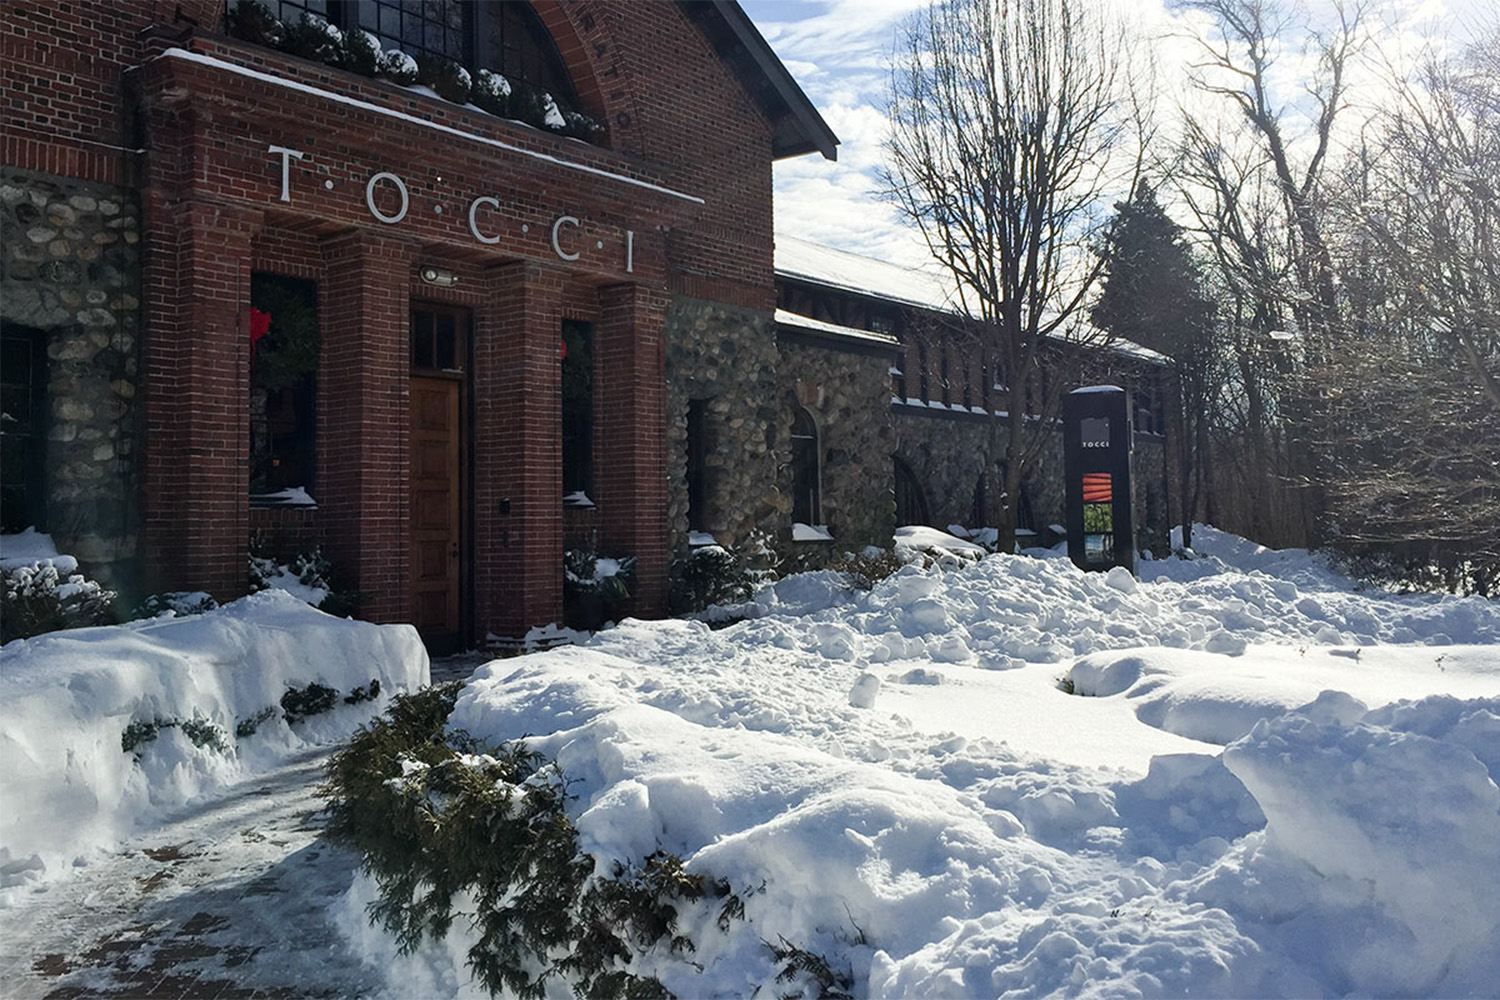 The Tocci office building with snow out front  